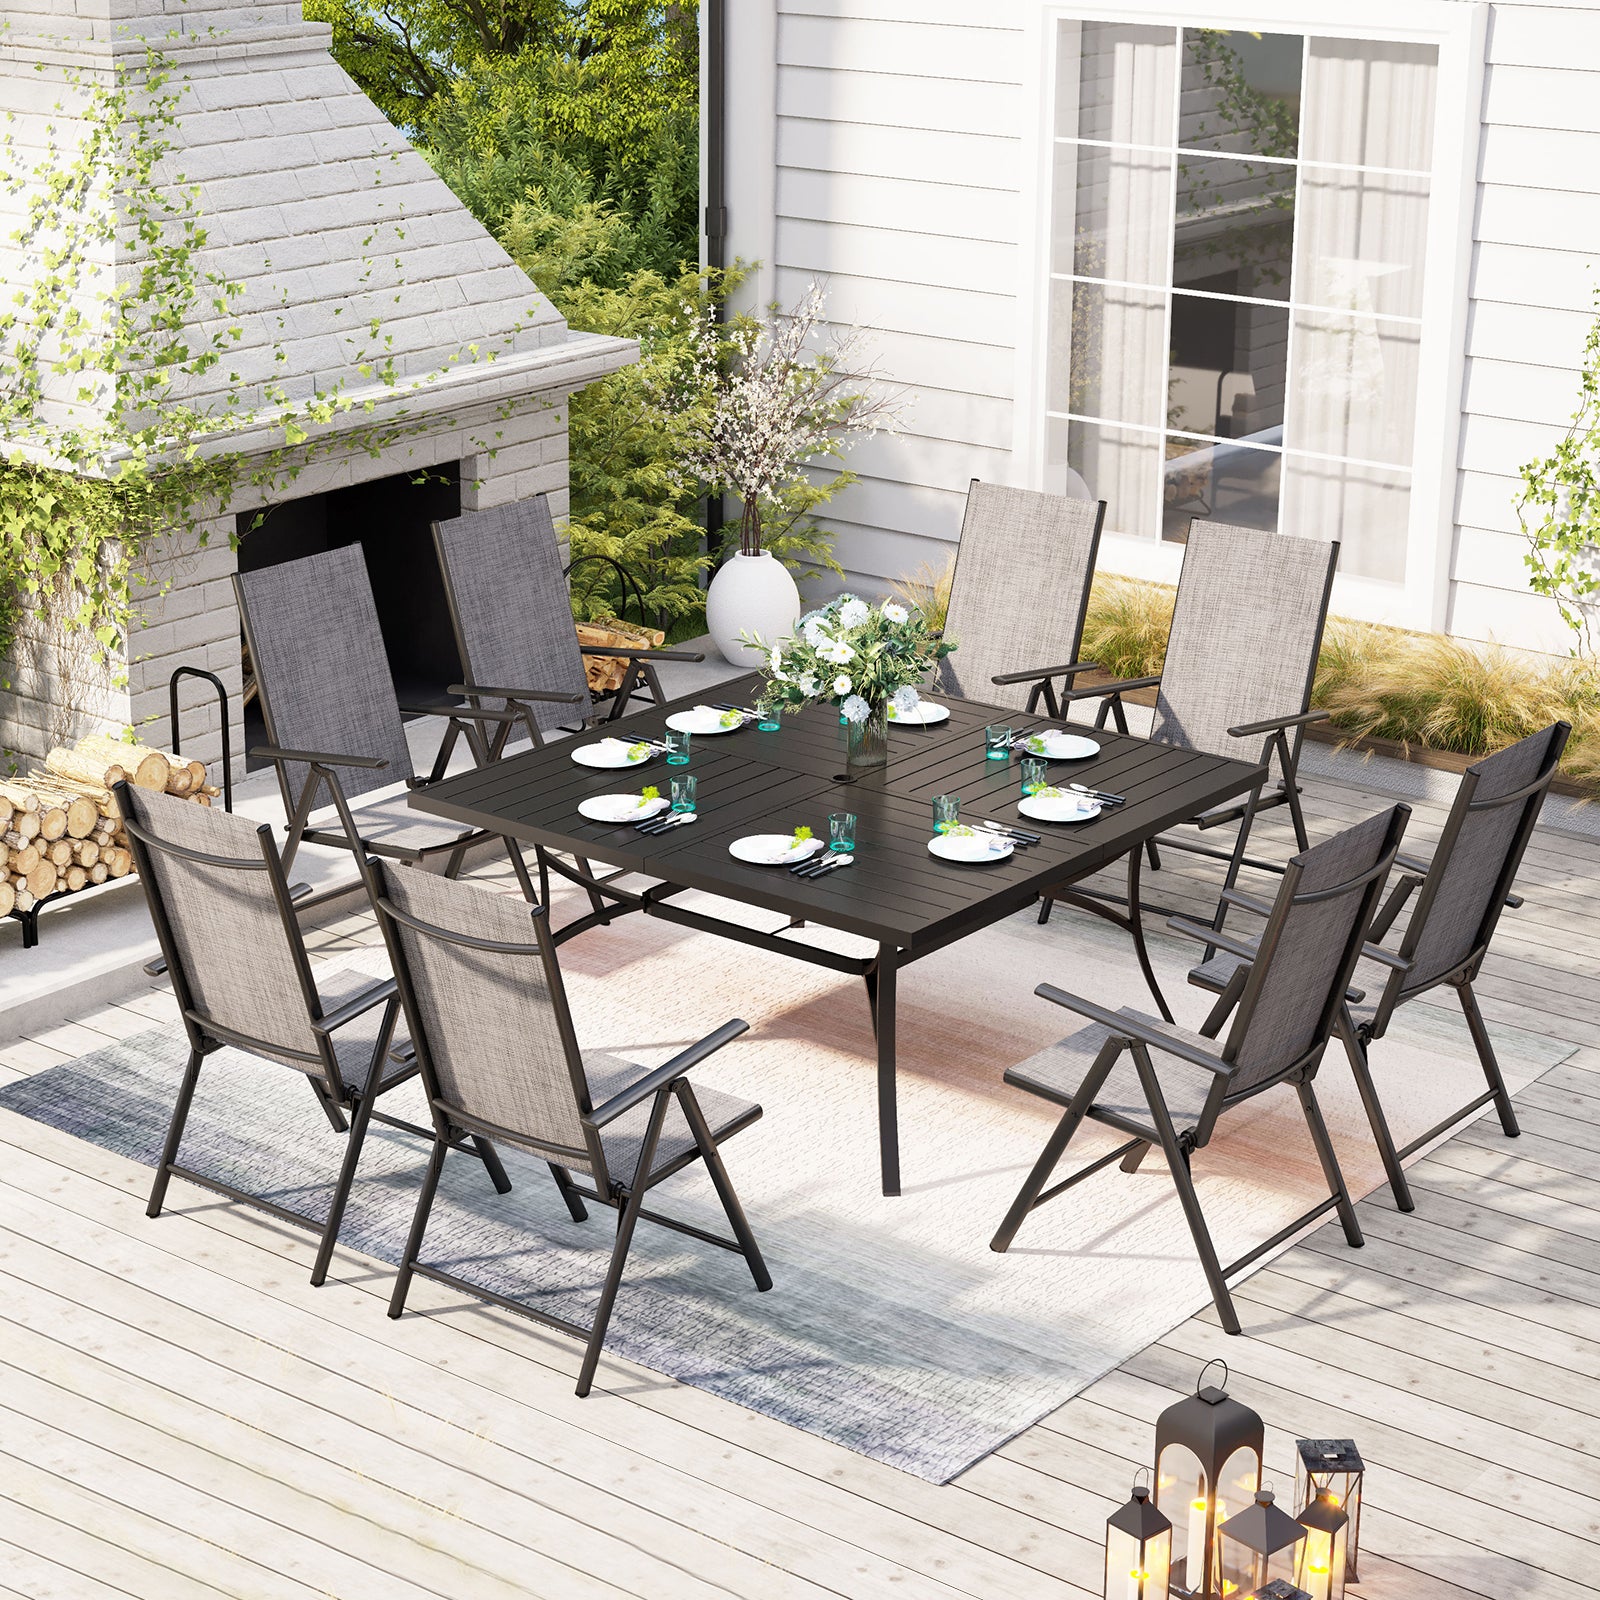 Sophia & William 9-Piece Patio Dining Sets Large Square Table & Textilene Foldable Chair